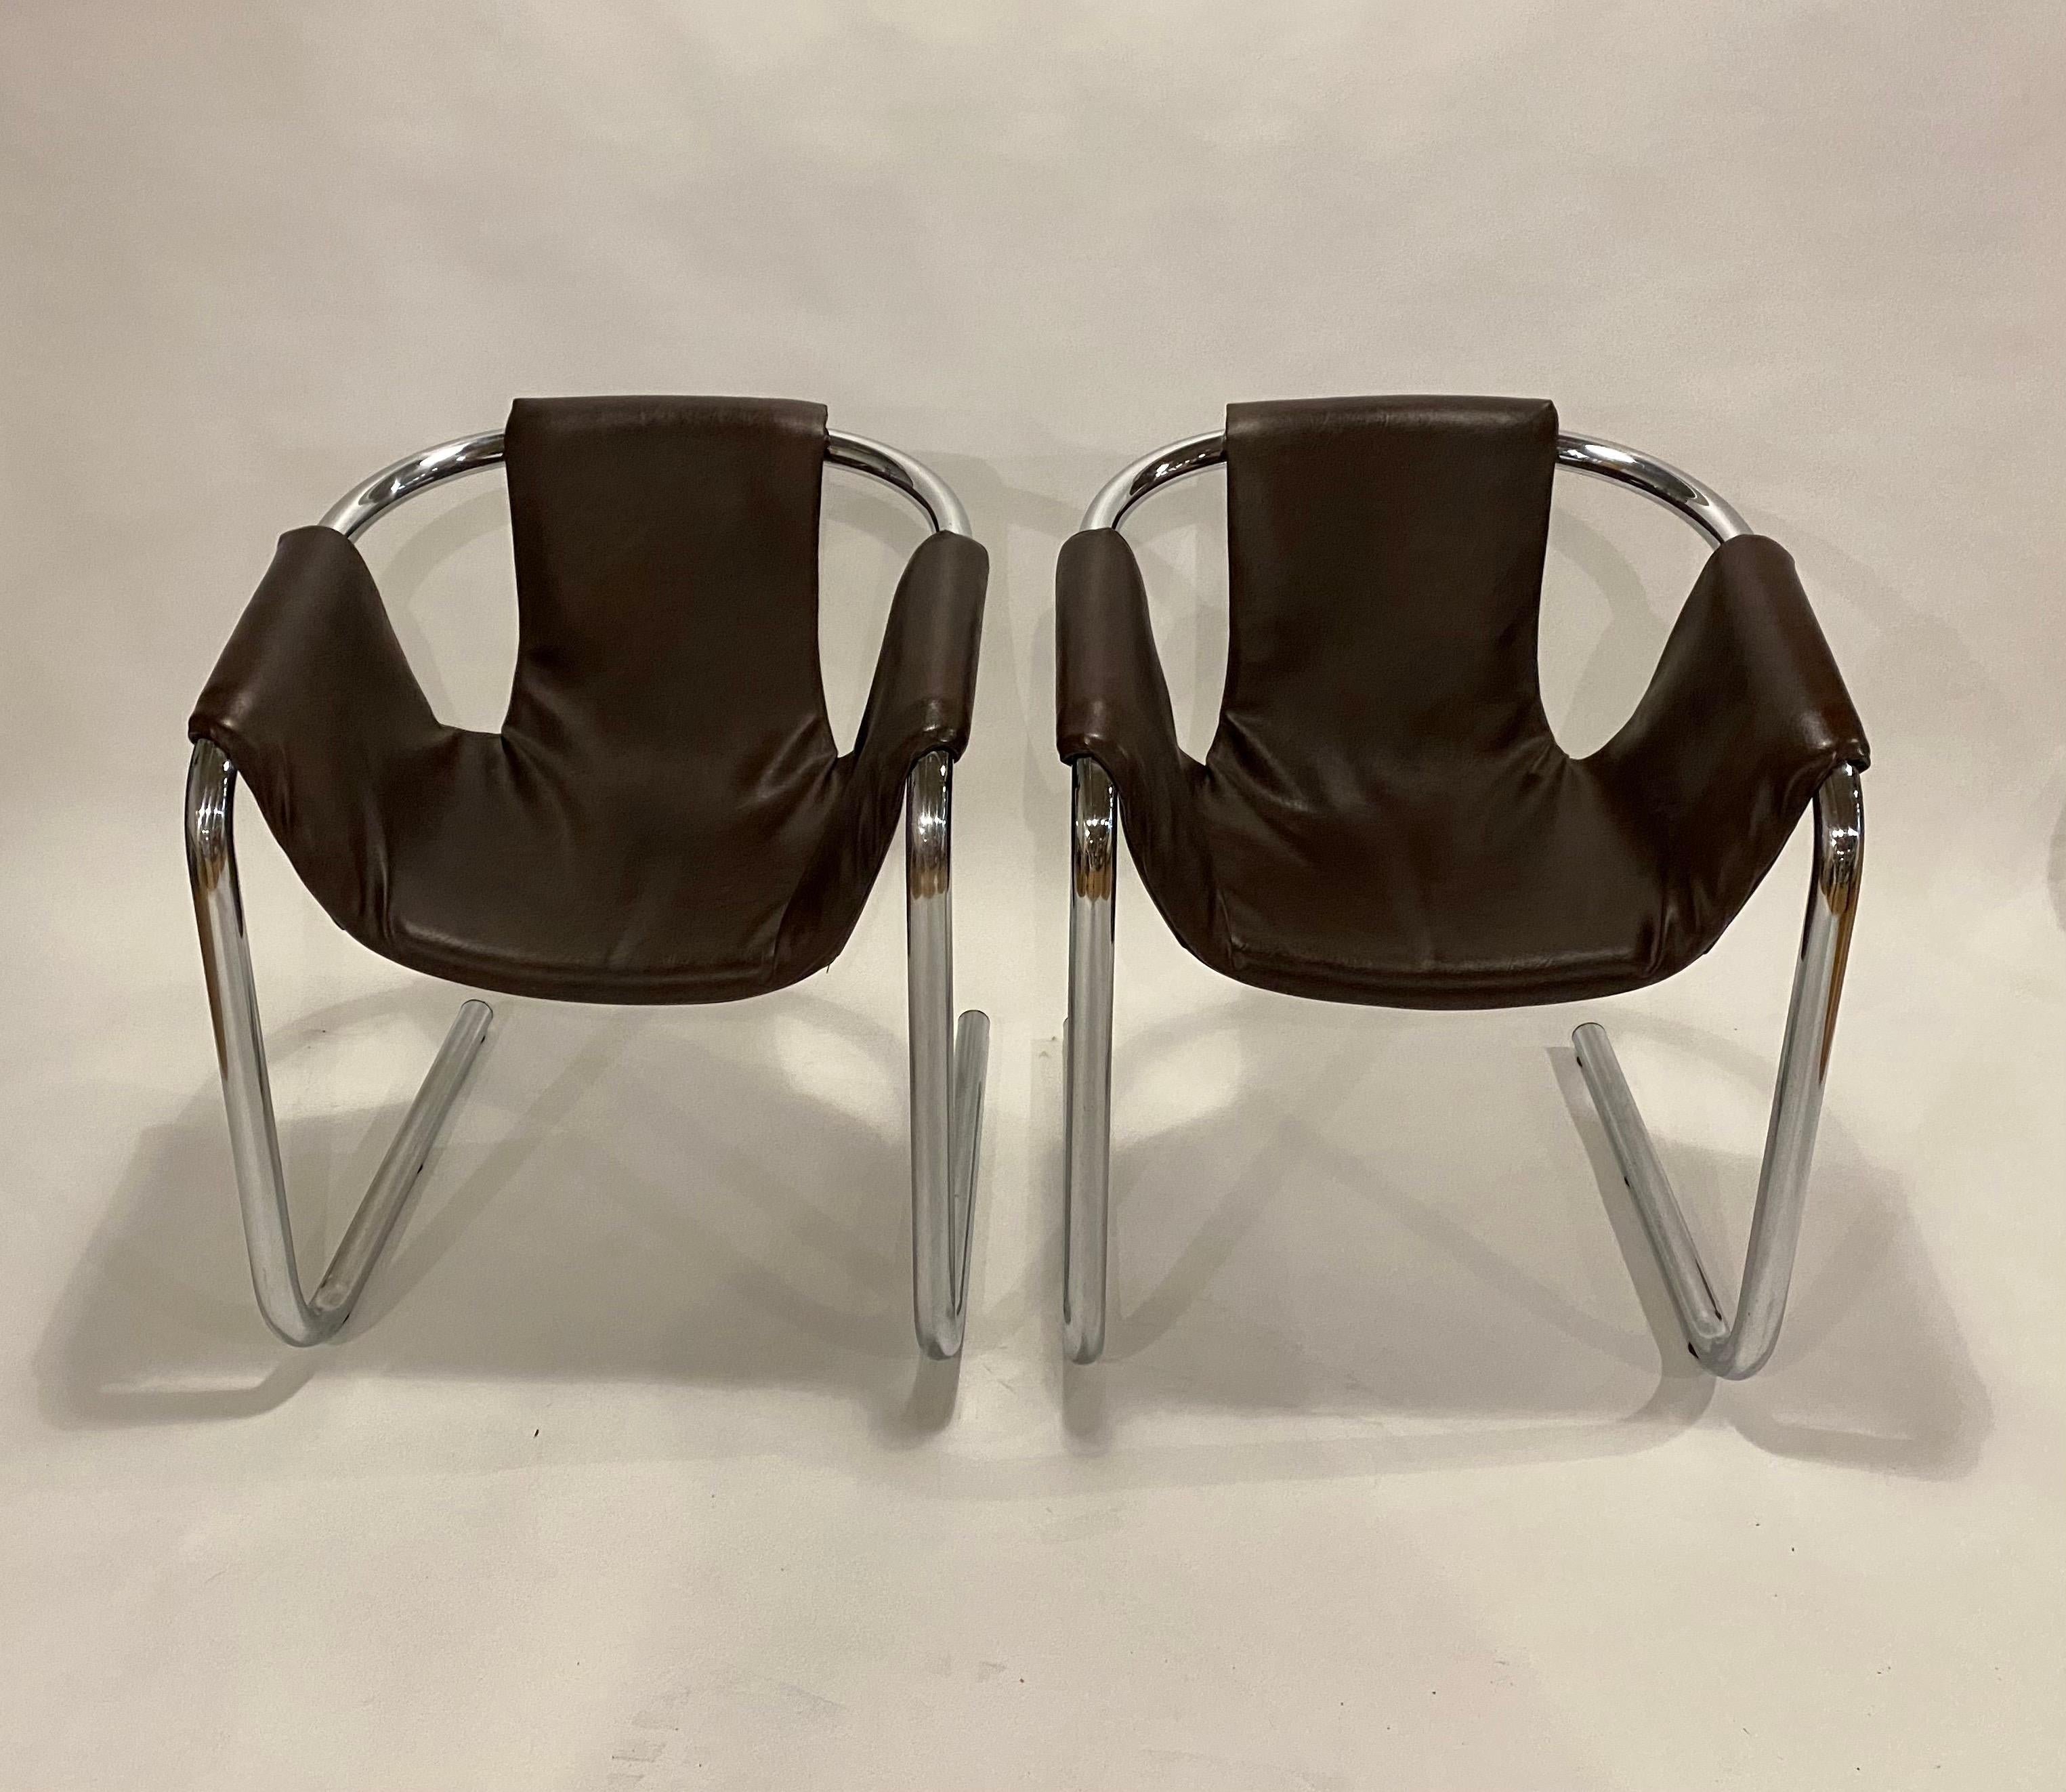 Pair of tuberlar chrome sling chairs designed by Duncan Burke and Gunter Eberle for Vecta Group in the 1970s manufactured in Italy.